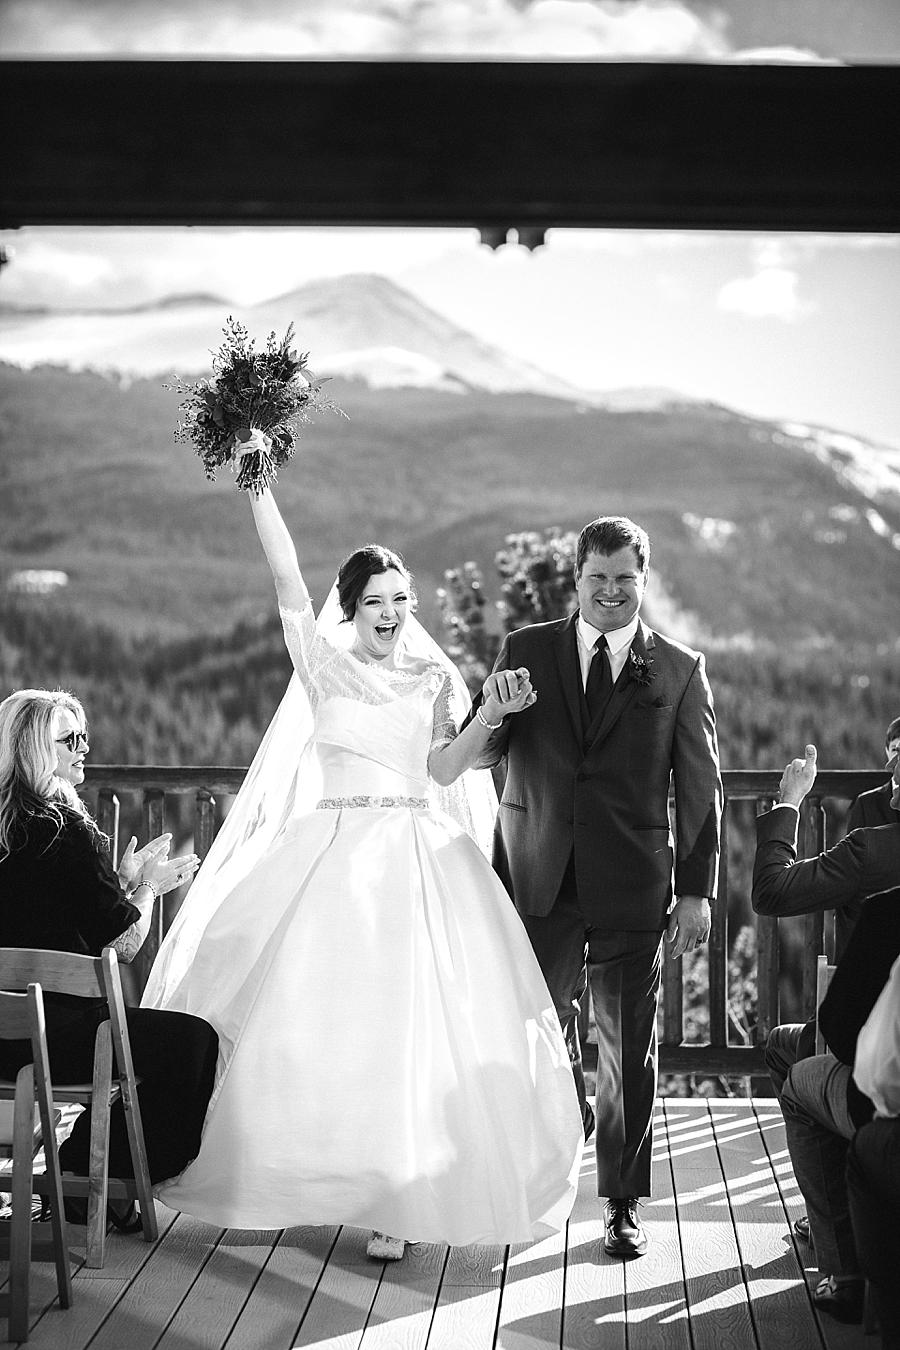 Just married at this Colorado Destination Wedding by Knoxville Wedding Photographer, Amanda May Photos.